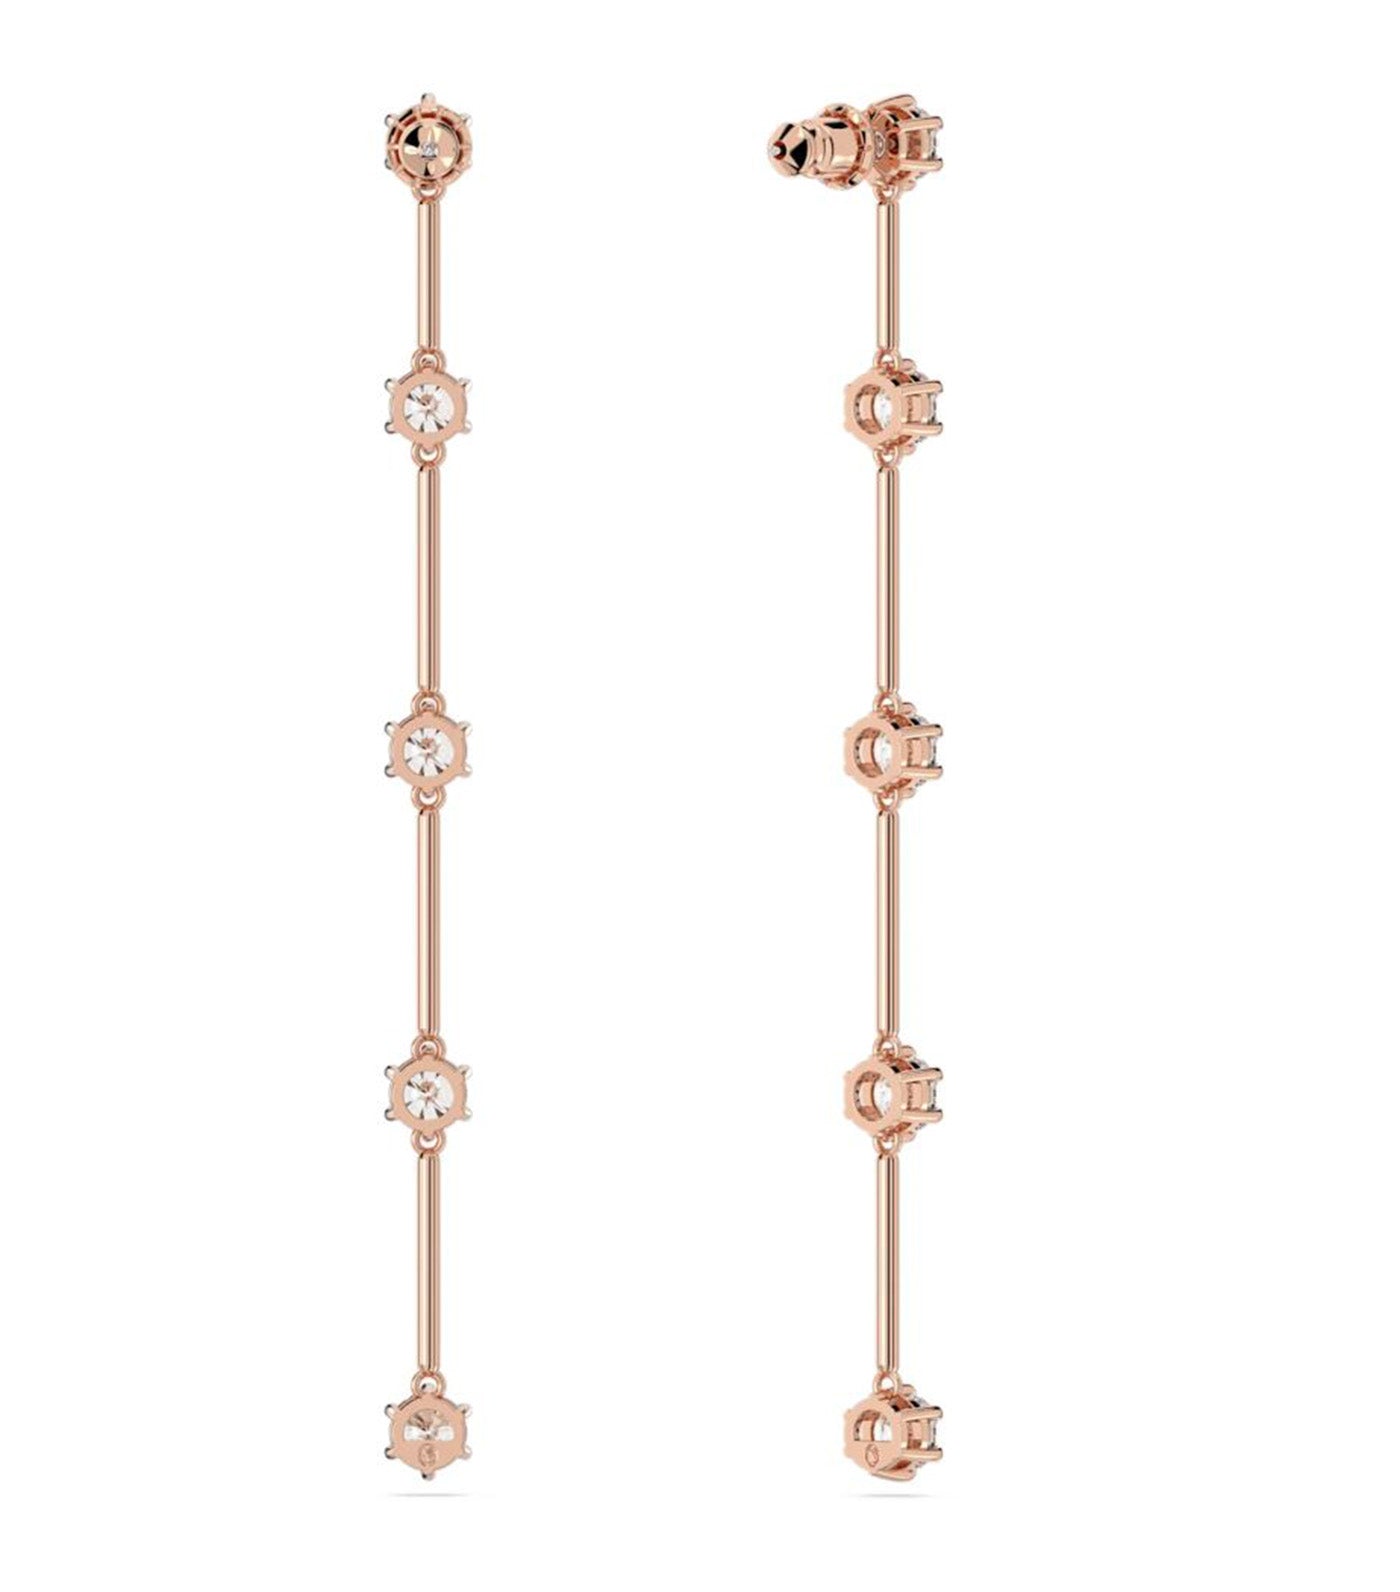 Constella Drop Earrings, Round Cut, White, Rose Gold-Tone Plated Pink